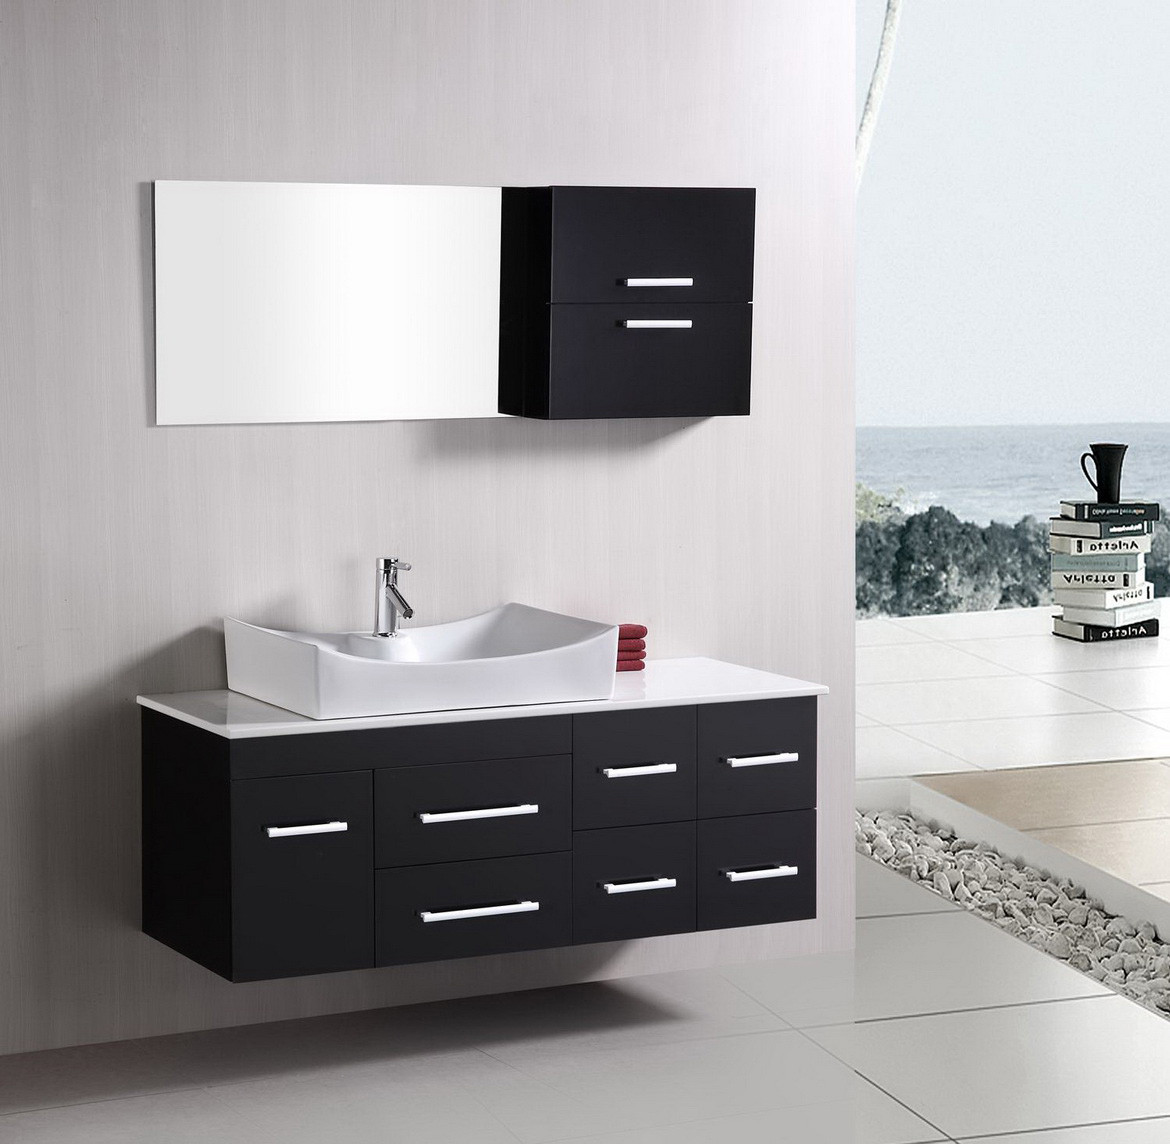 Contemporary Bathroom Cabinets
 45 RELAXING BATHROOM VANITY INSPIRATIONS Godfather